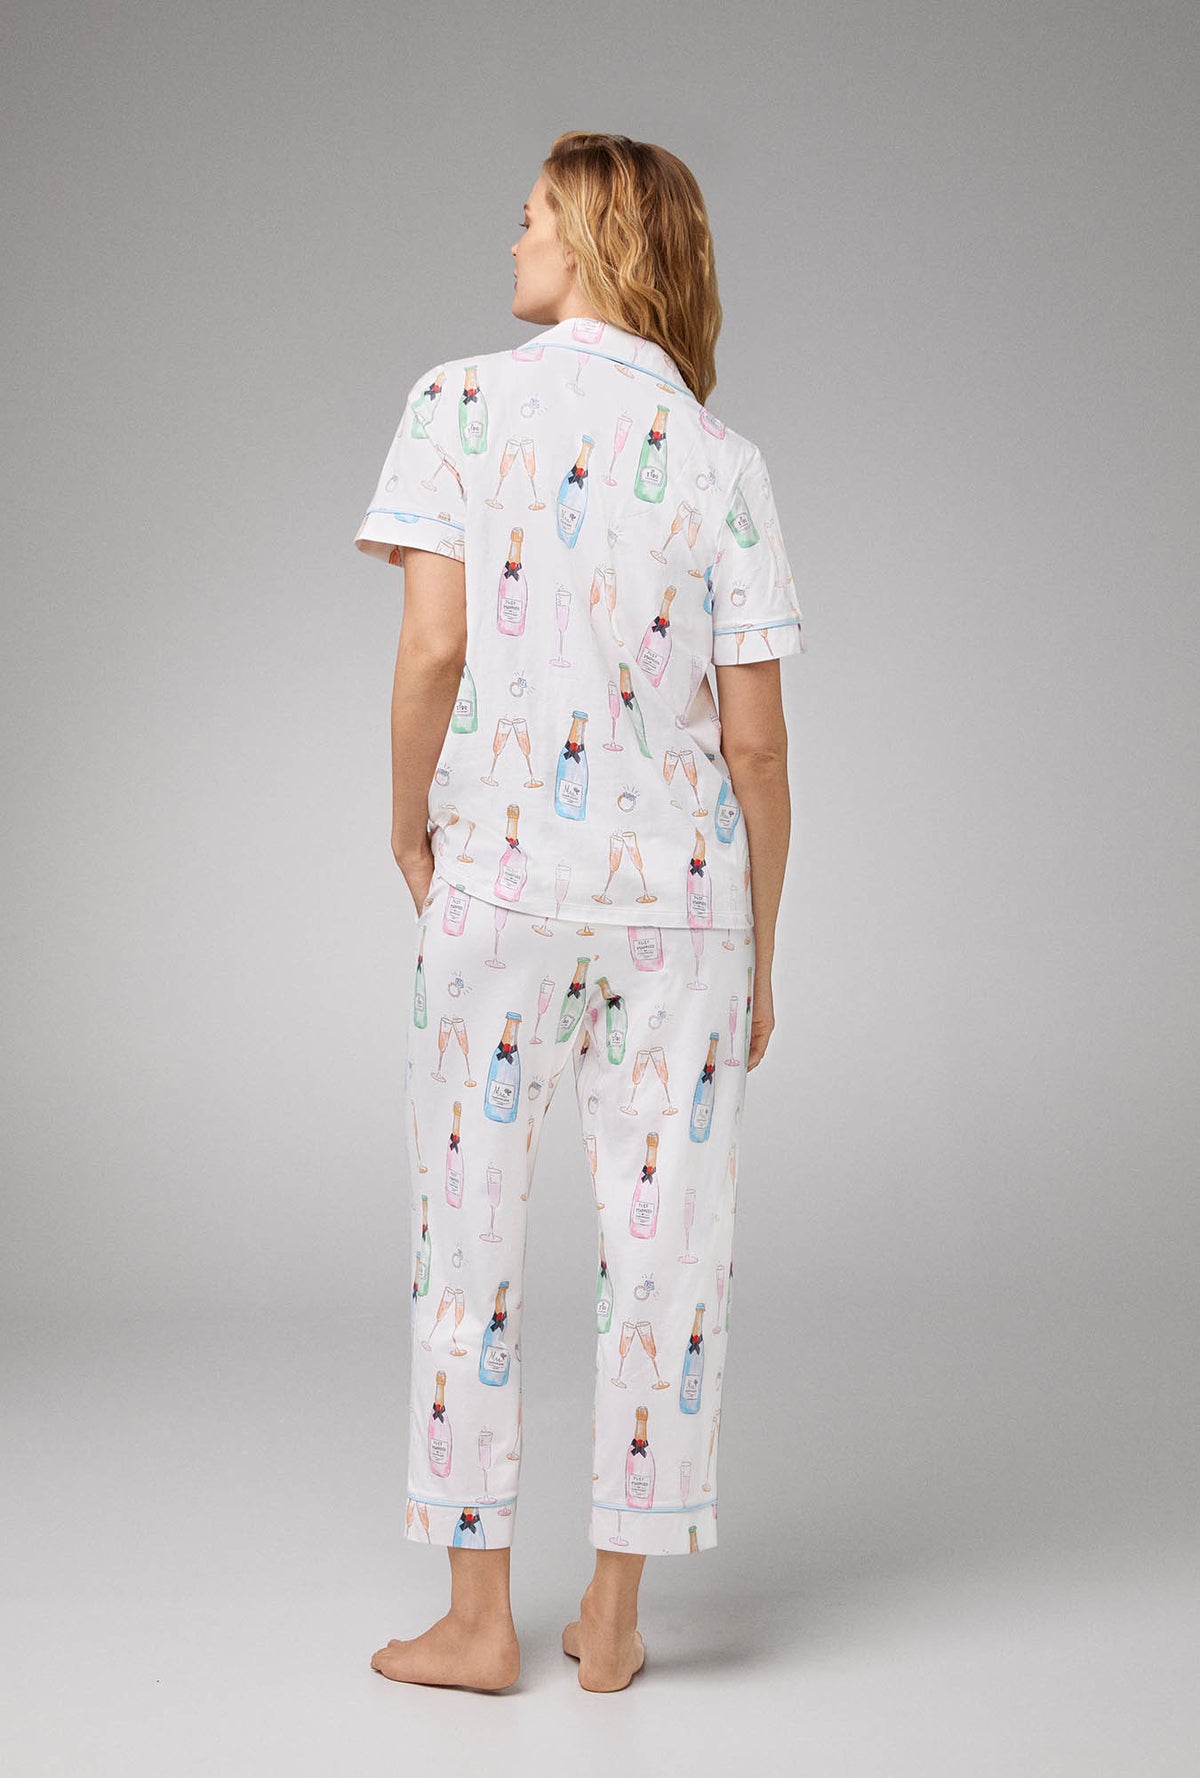 A lady wearing Short Sleeve Classic Stretch Jersey Cropped PJ Set with Champagne Wedding print